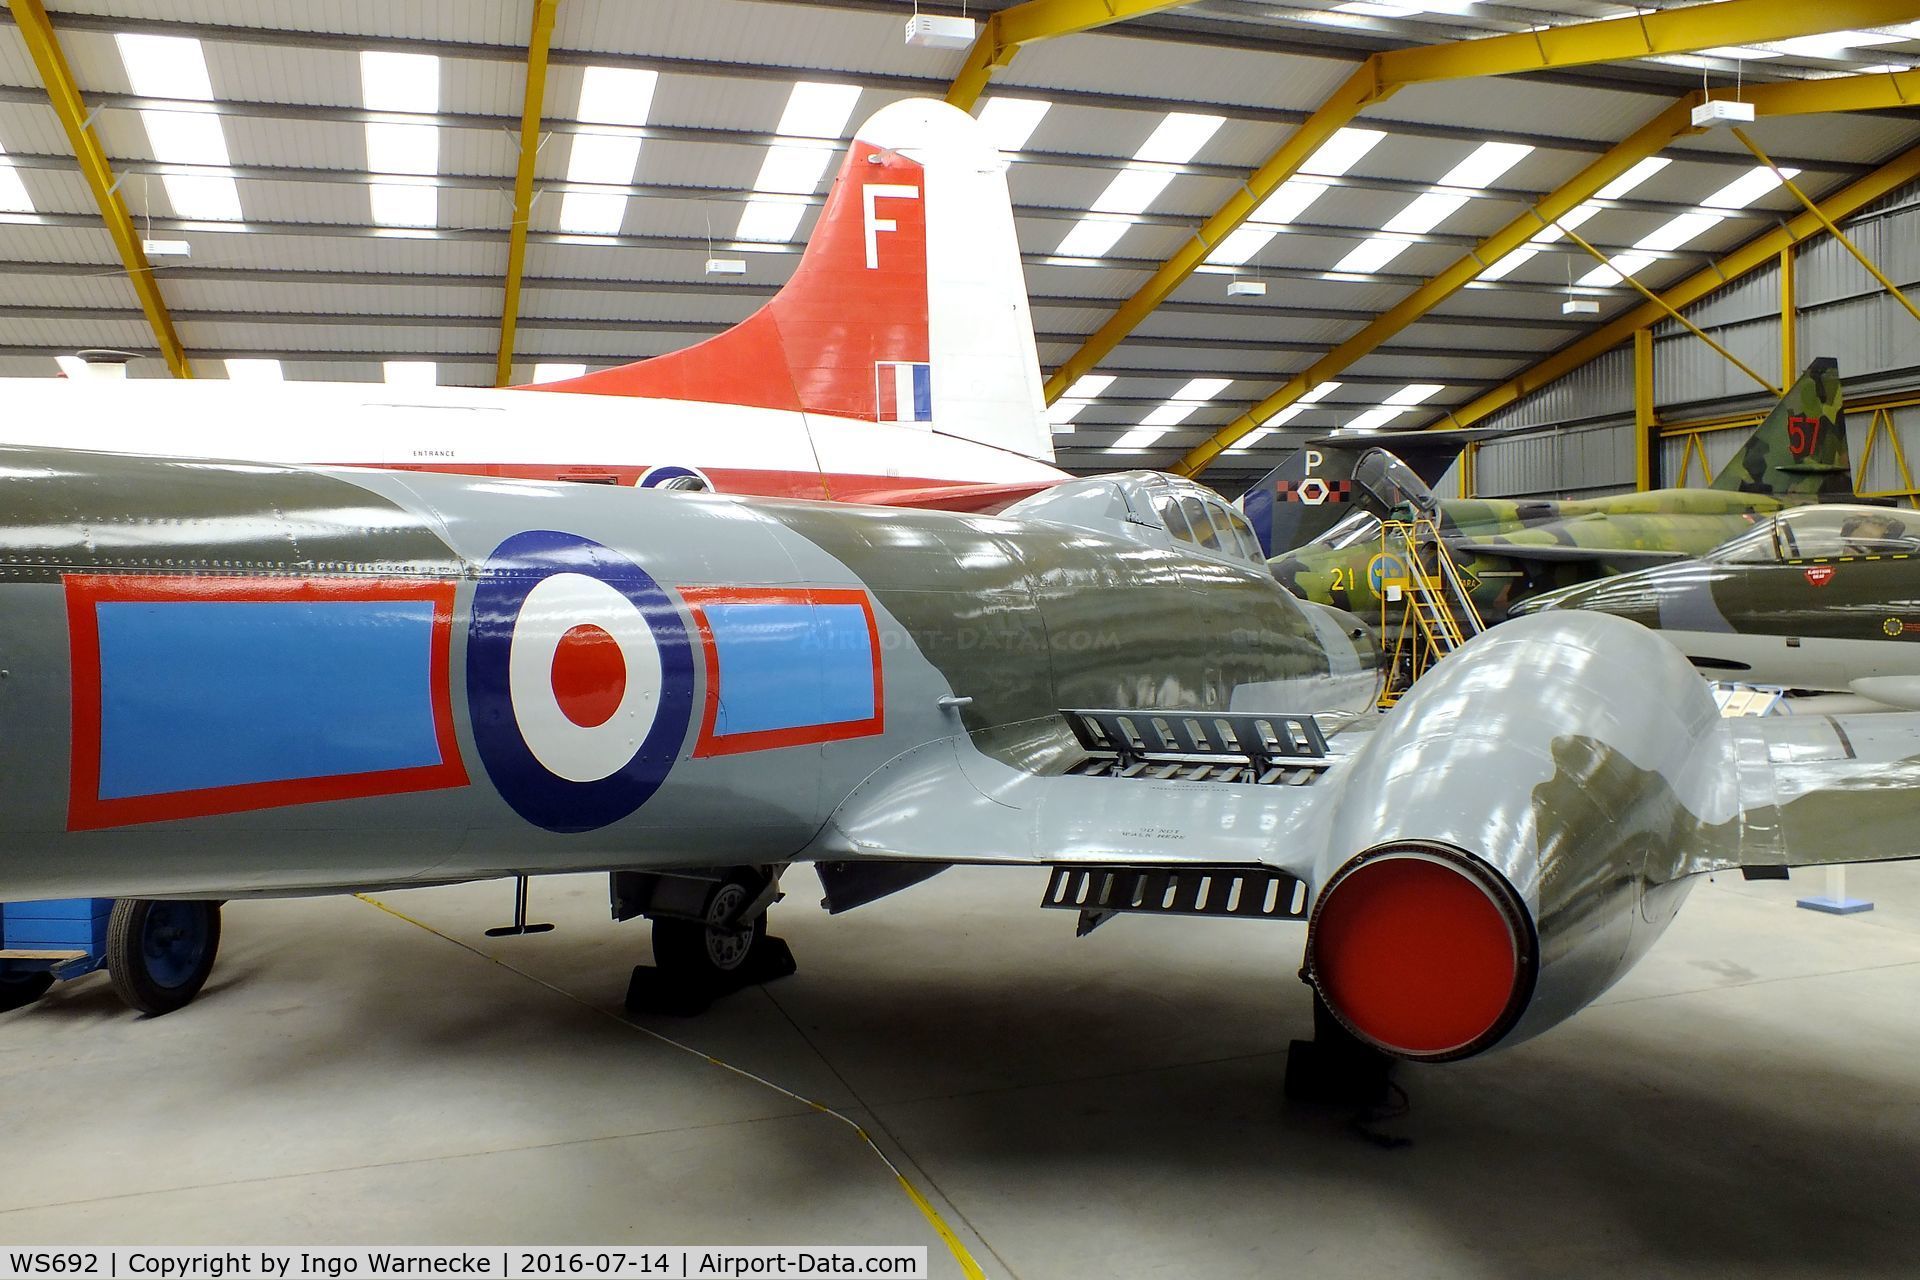 WS692, Gloster Meteor NF.12 C/N Not found WS692, Gloster Meteor NF12 at the Newark Air Museum